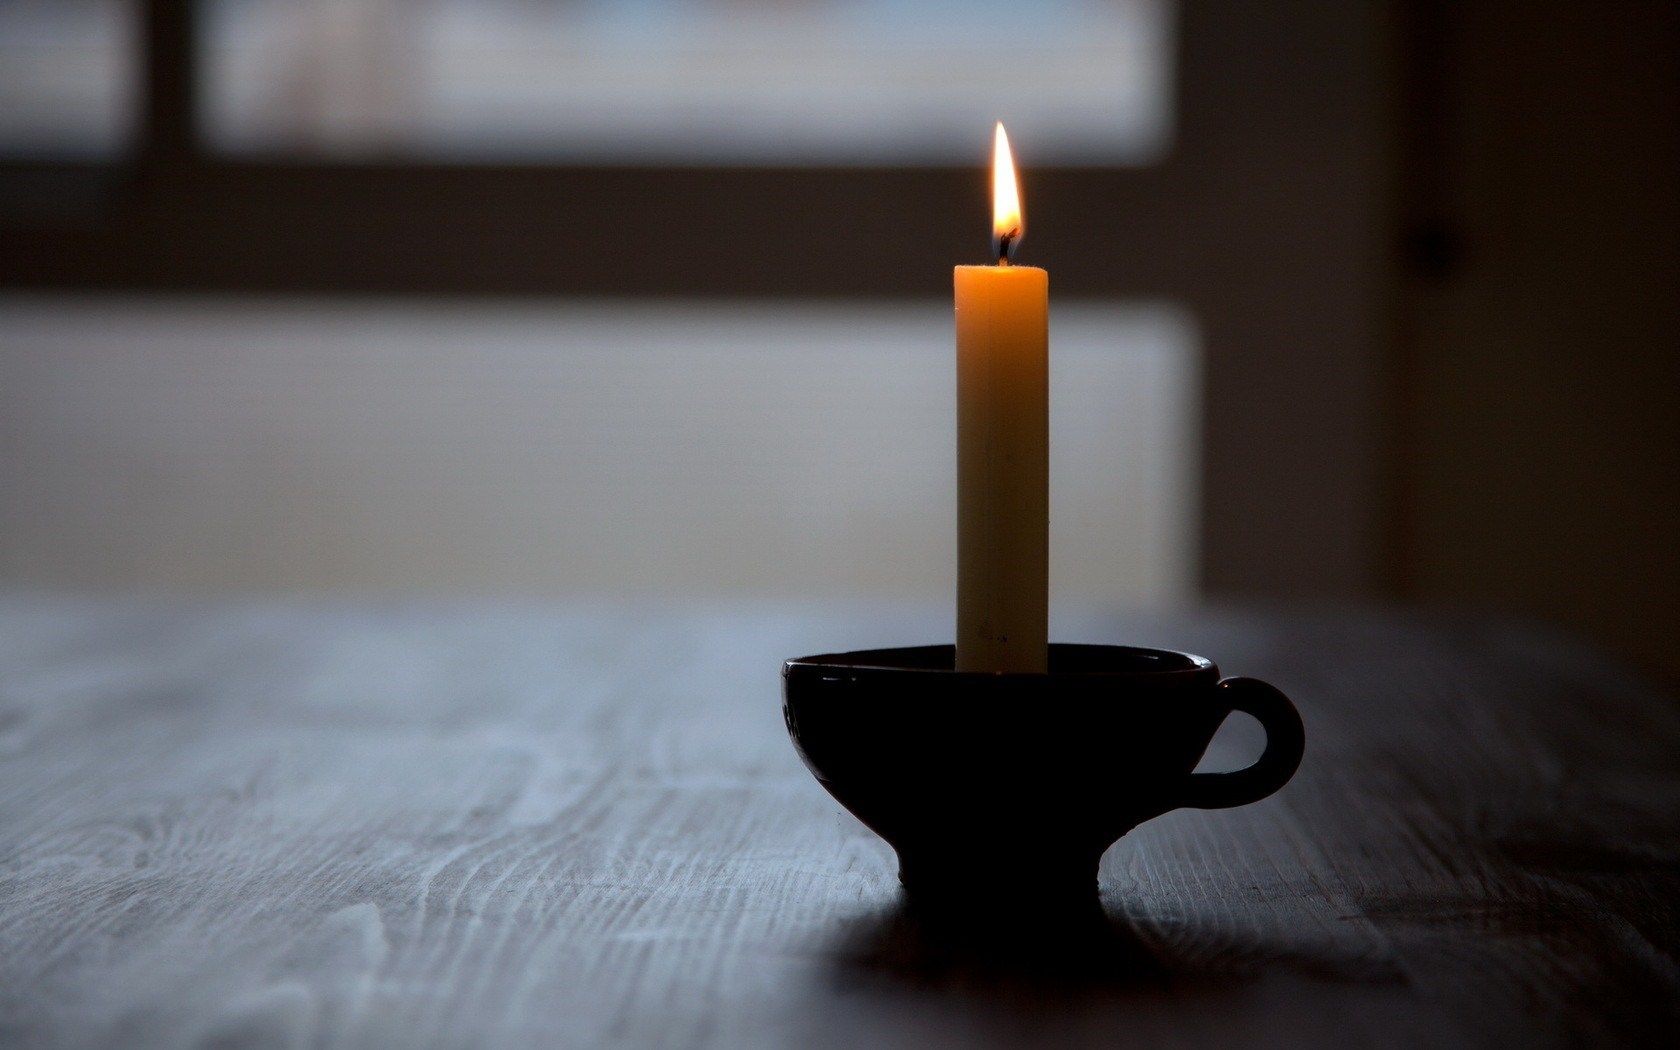 HD wallpaper, Close, Candle, Table, Up, Photo